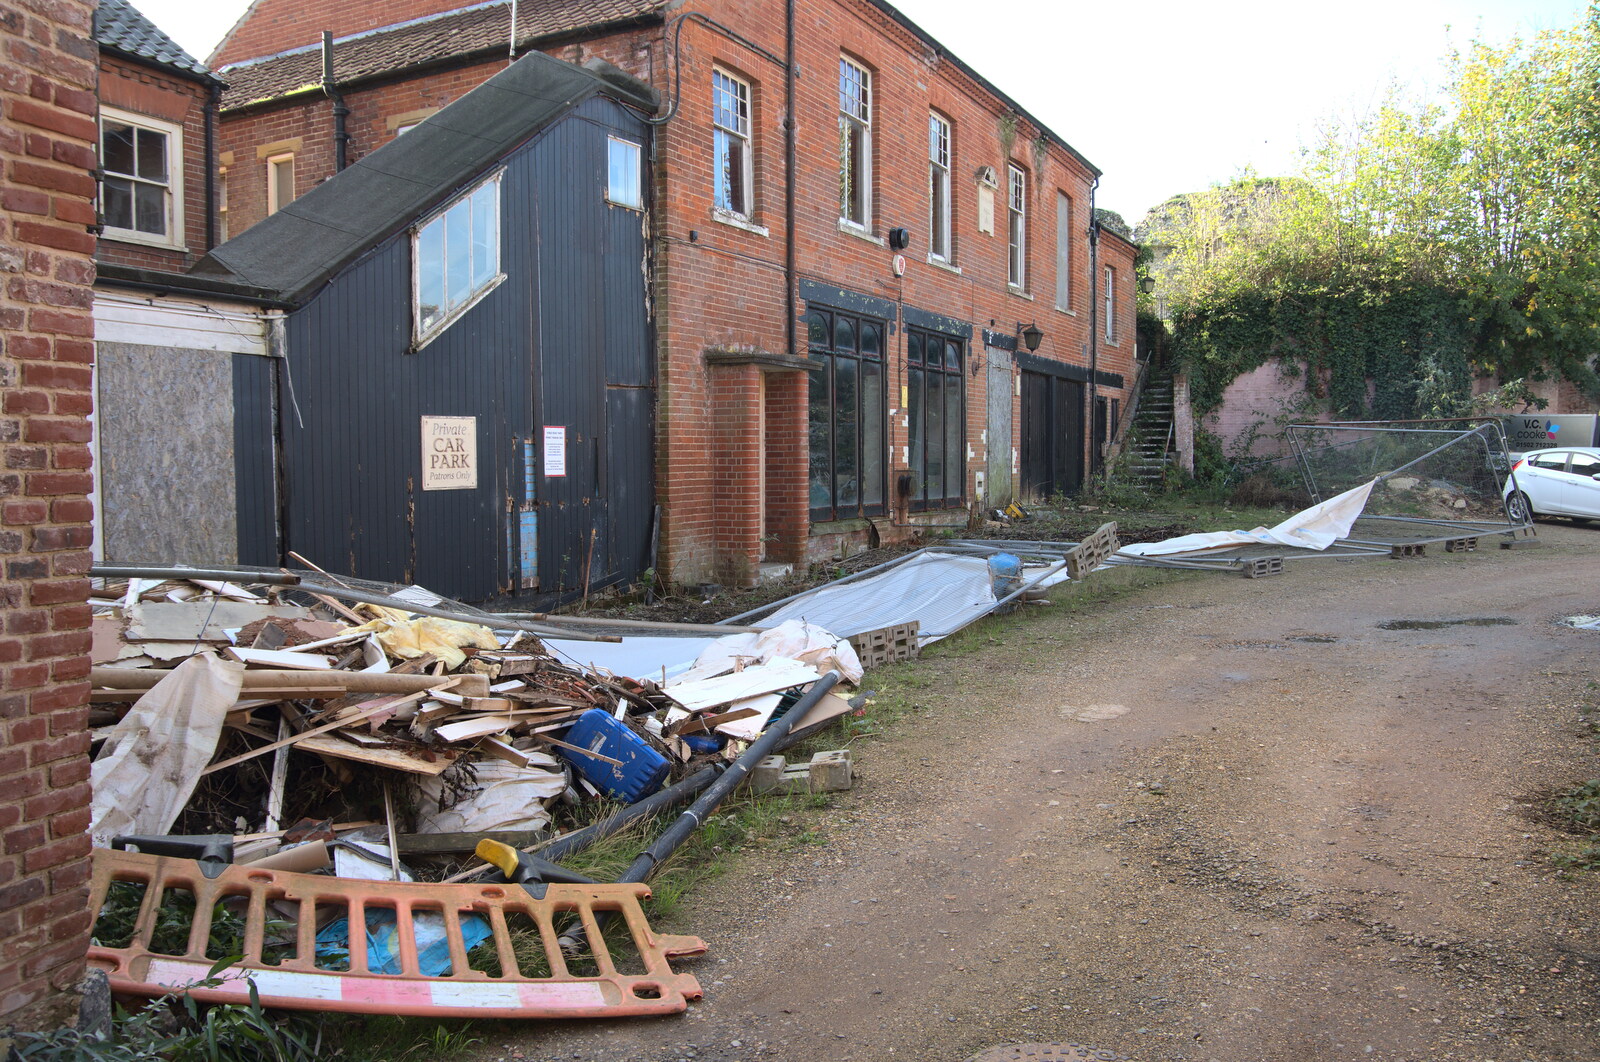 A Postcard from Bungay, Suffolk - 2nd November 2022: Dereliction in a back yard